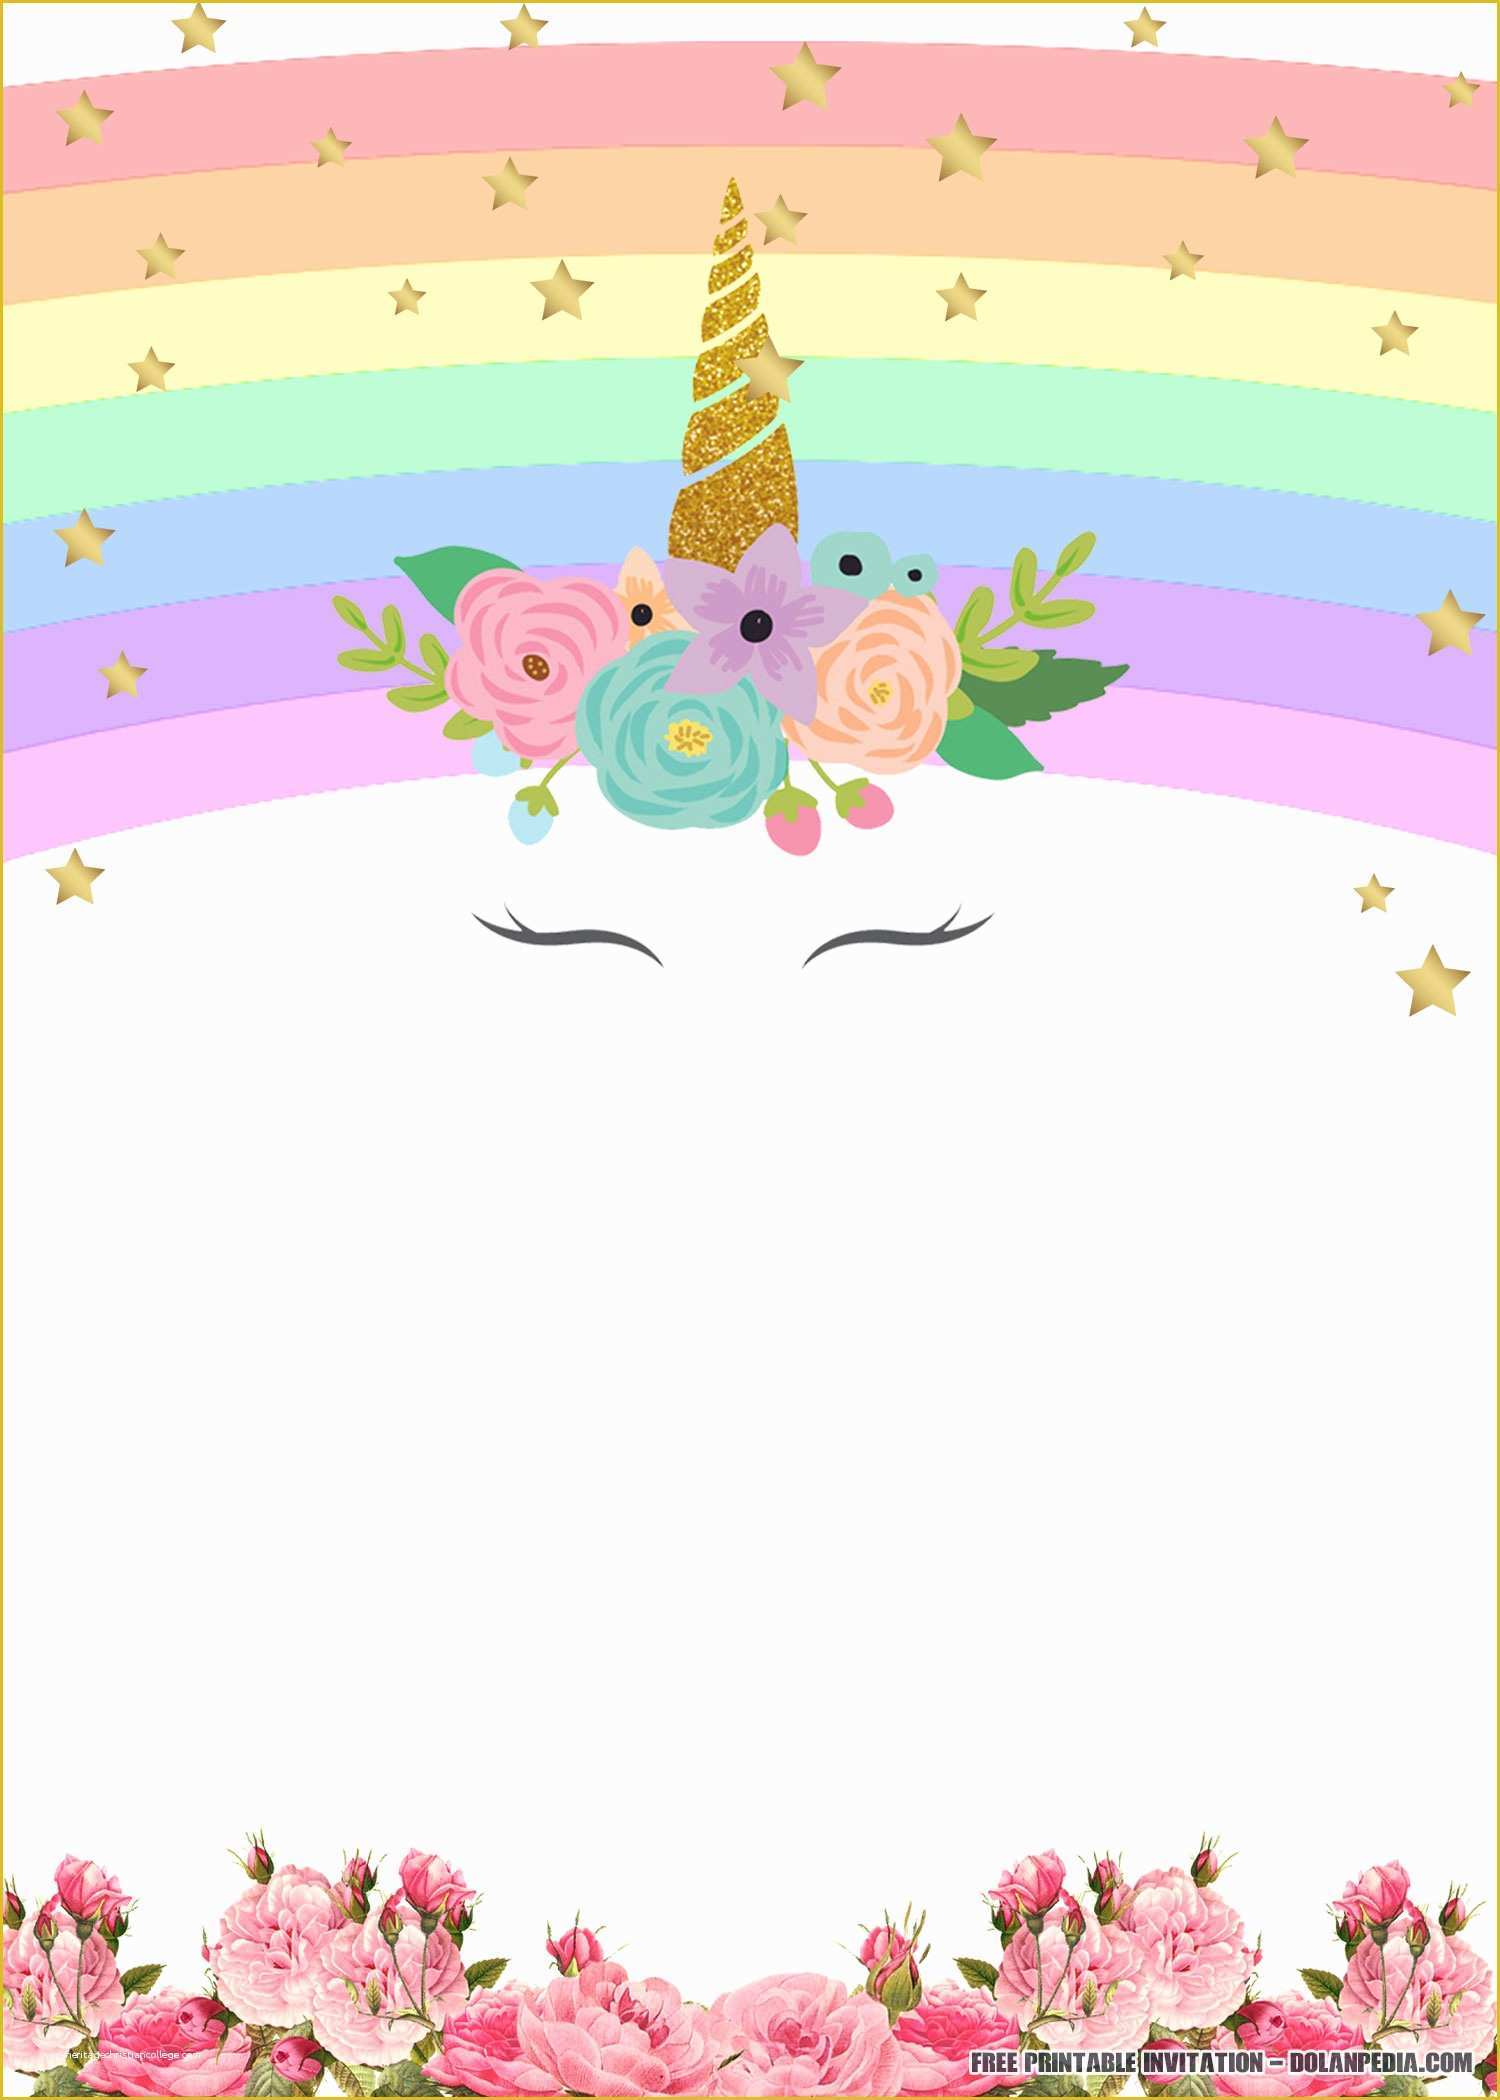 unicorn-party-invitations-free-template-of-unicorn-birthday-invitation-unicorn-party-invitation